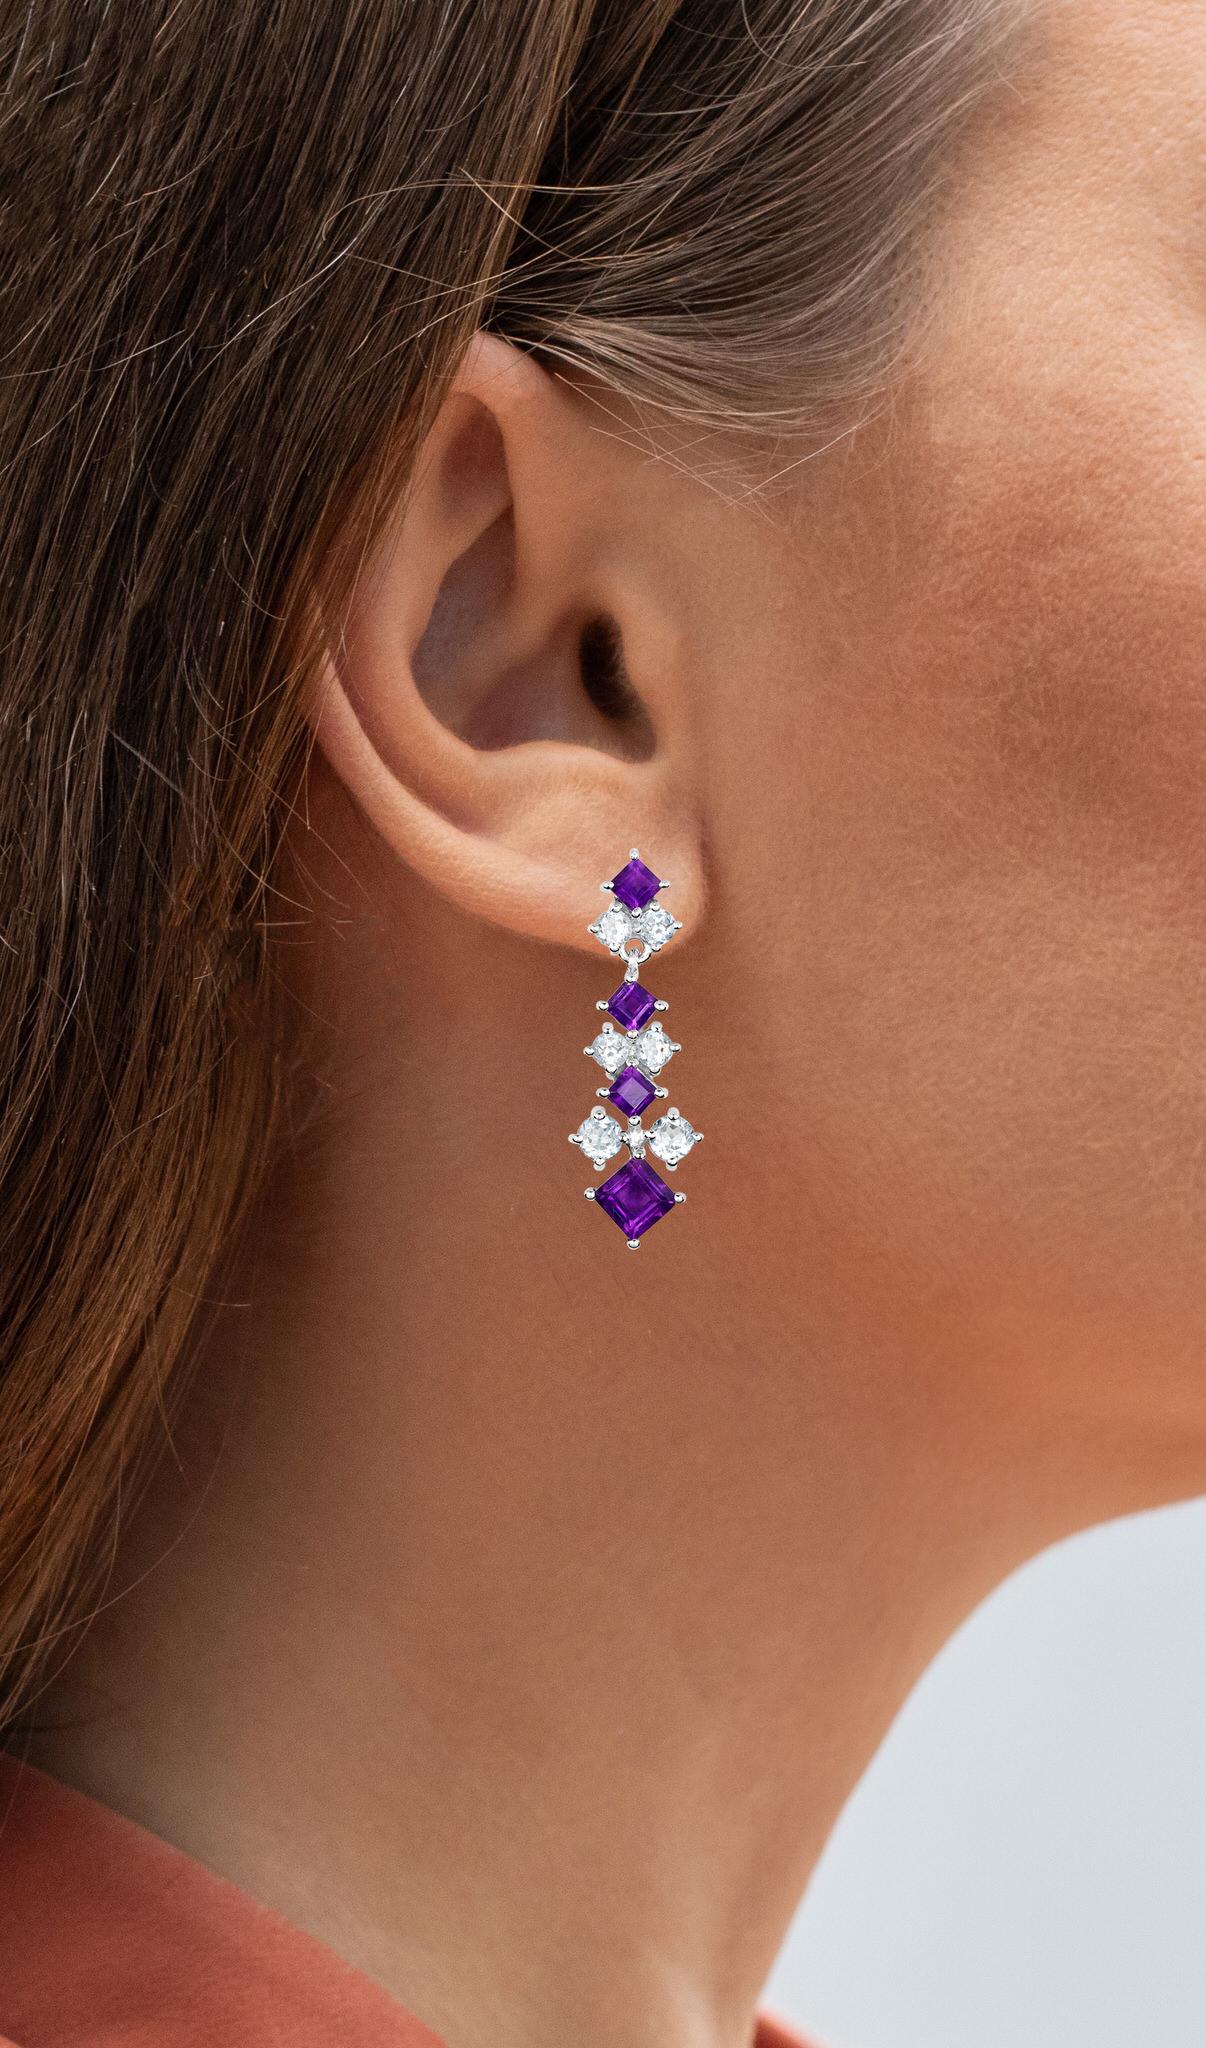 It comes with the Gemological Appraisal by GIA GG/AJP
All Gemstones are Natural
Gemstones: Amethysts, Blue Topazes
Total Carat Weight: 5.00 Carats
Cut = Mixed Cut
Total Quantity Of Stones: 20
Metal: Rhodium Plated Sterling Silver
Post With Friction